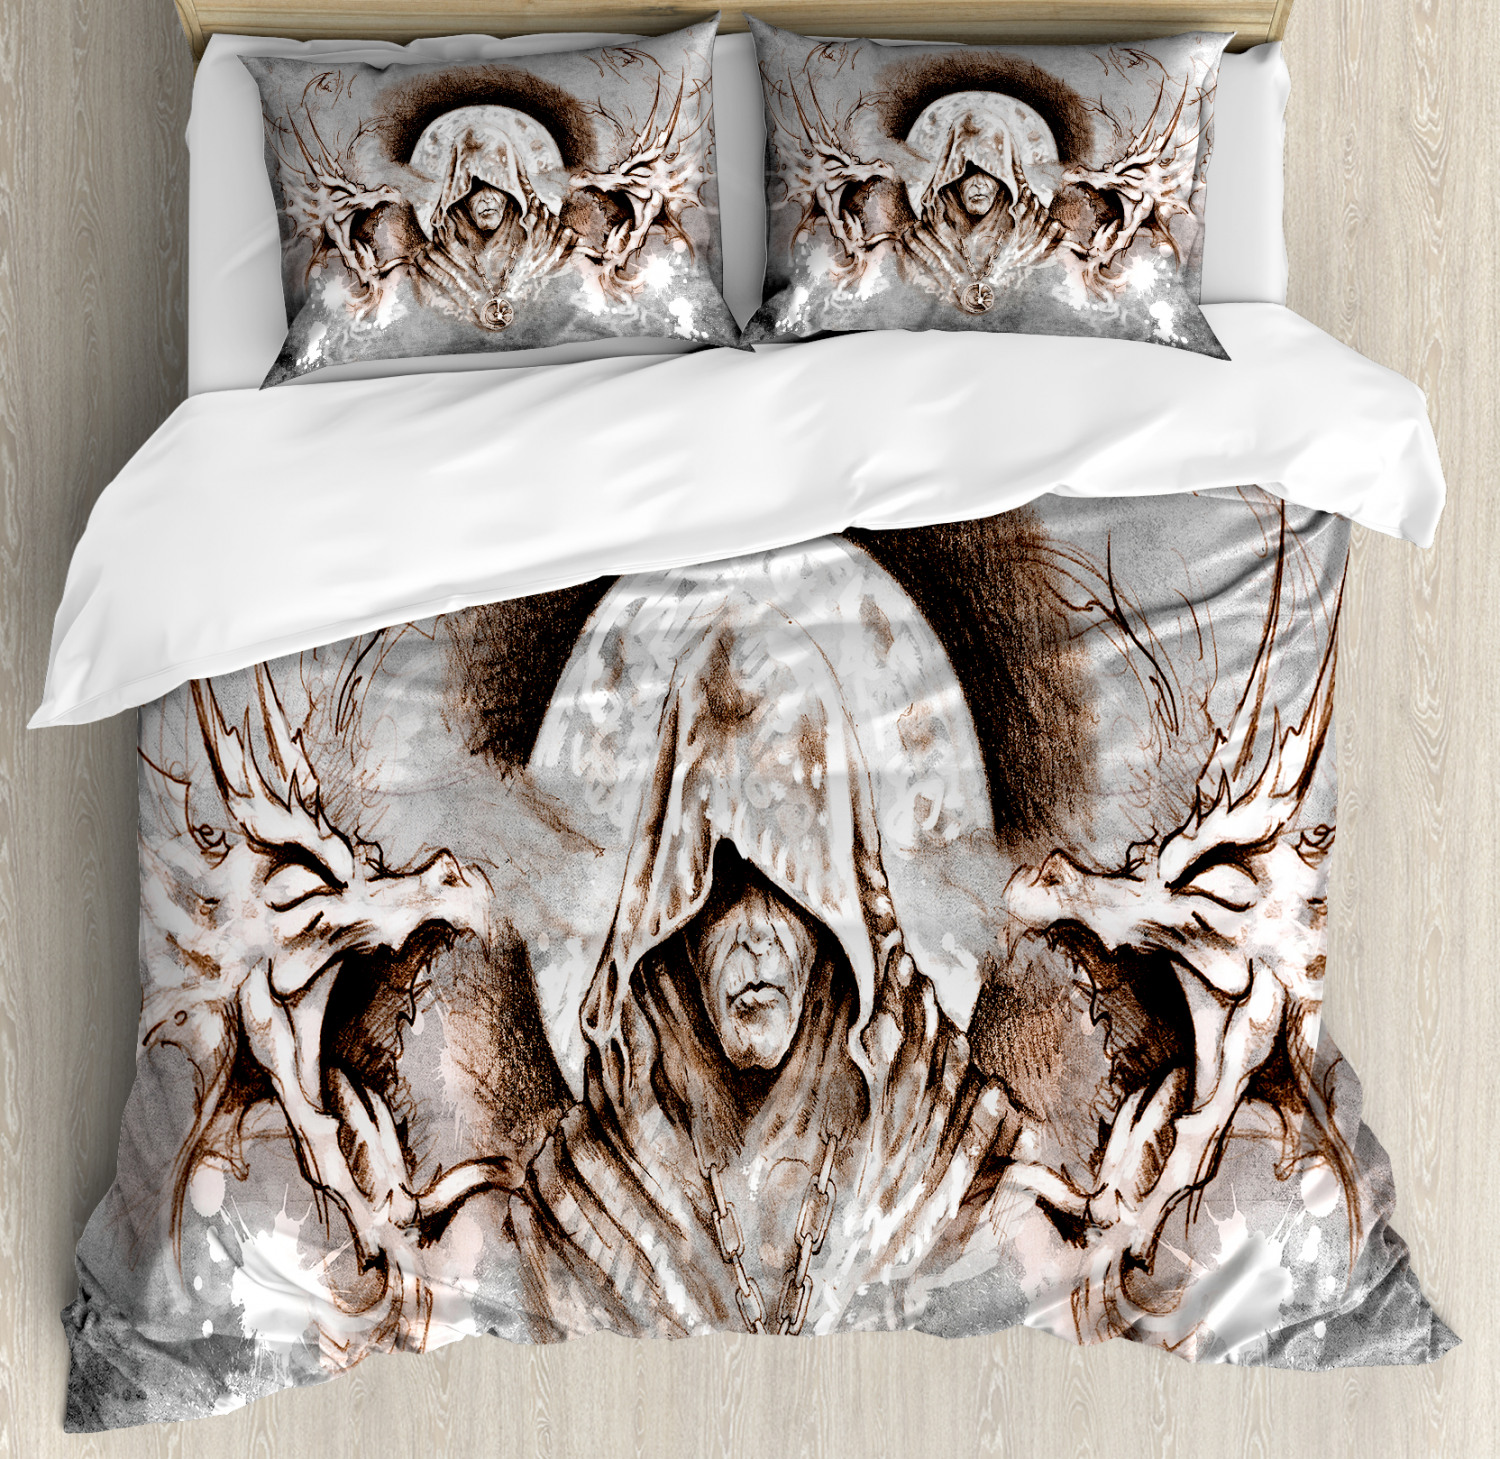 Details About Dragon Duvet Cover Set With Pillow Shams Monk Branches Medieval Print